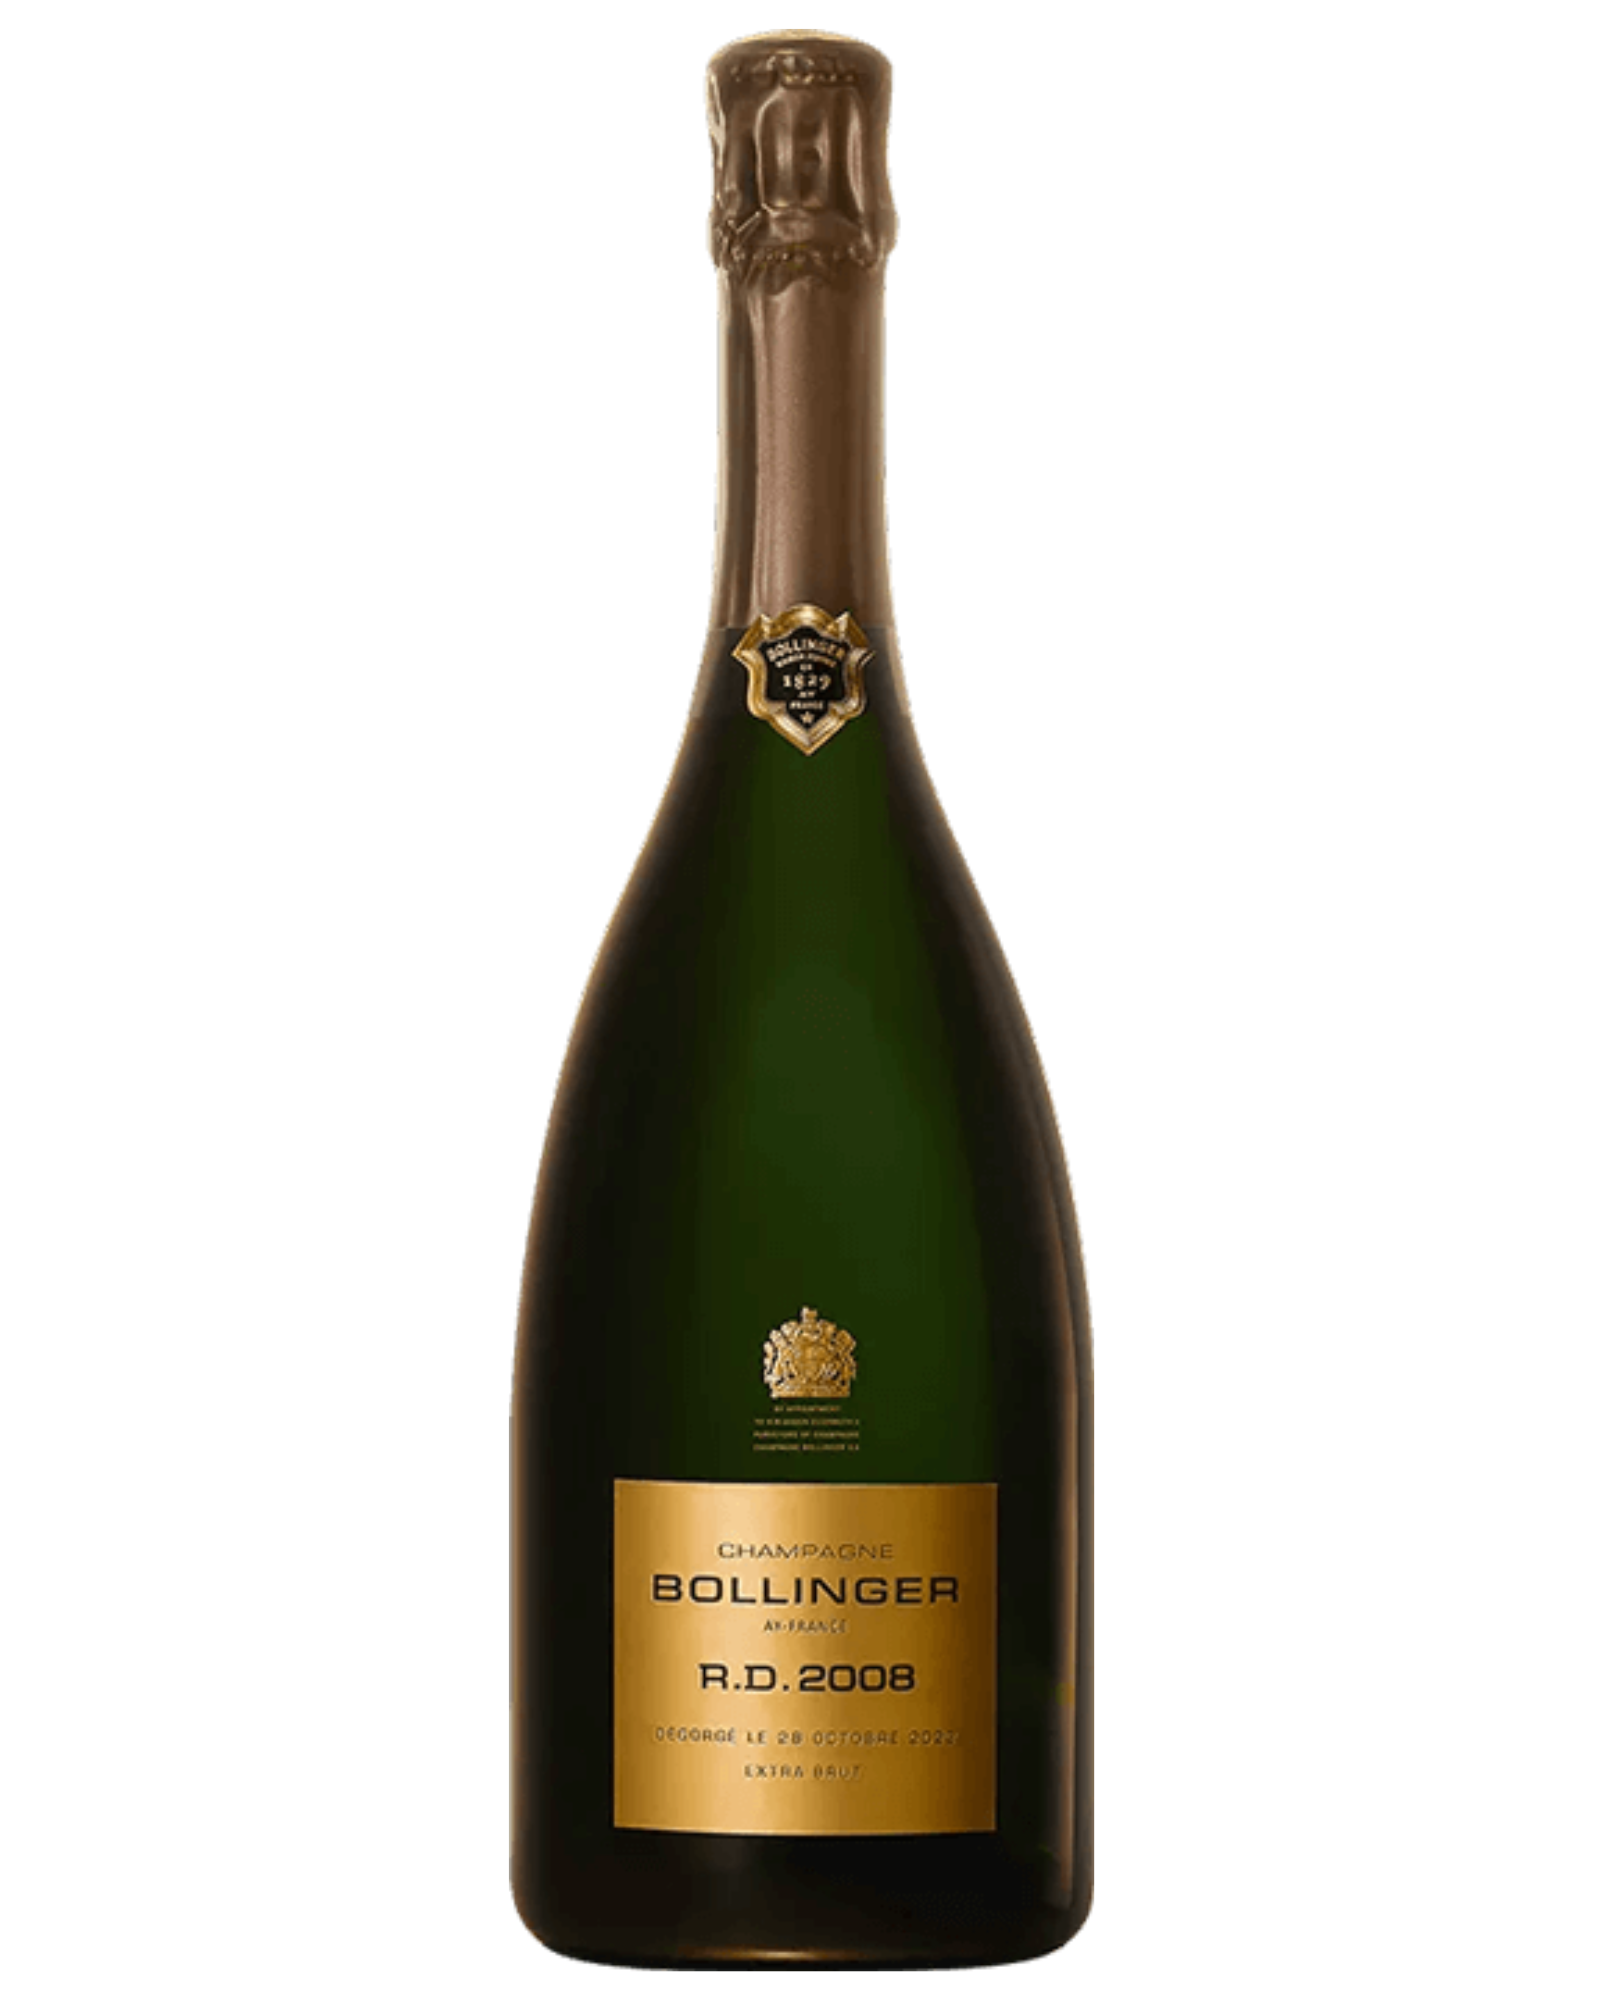 Bollinger R.D. 2008 Champagne - Premium Champagne from Bollinger - Shop now at Whiskery